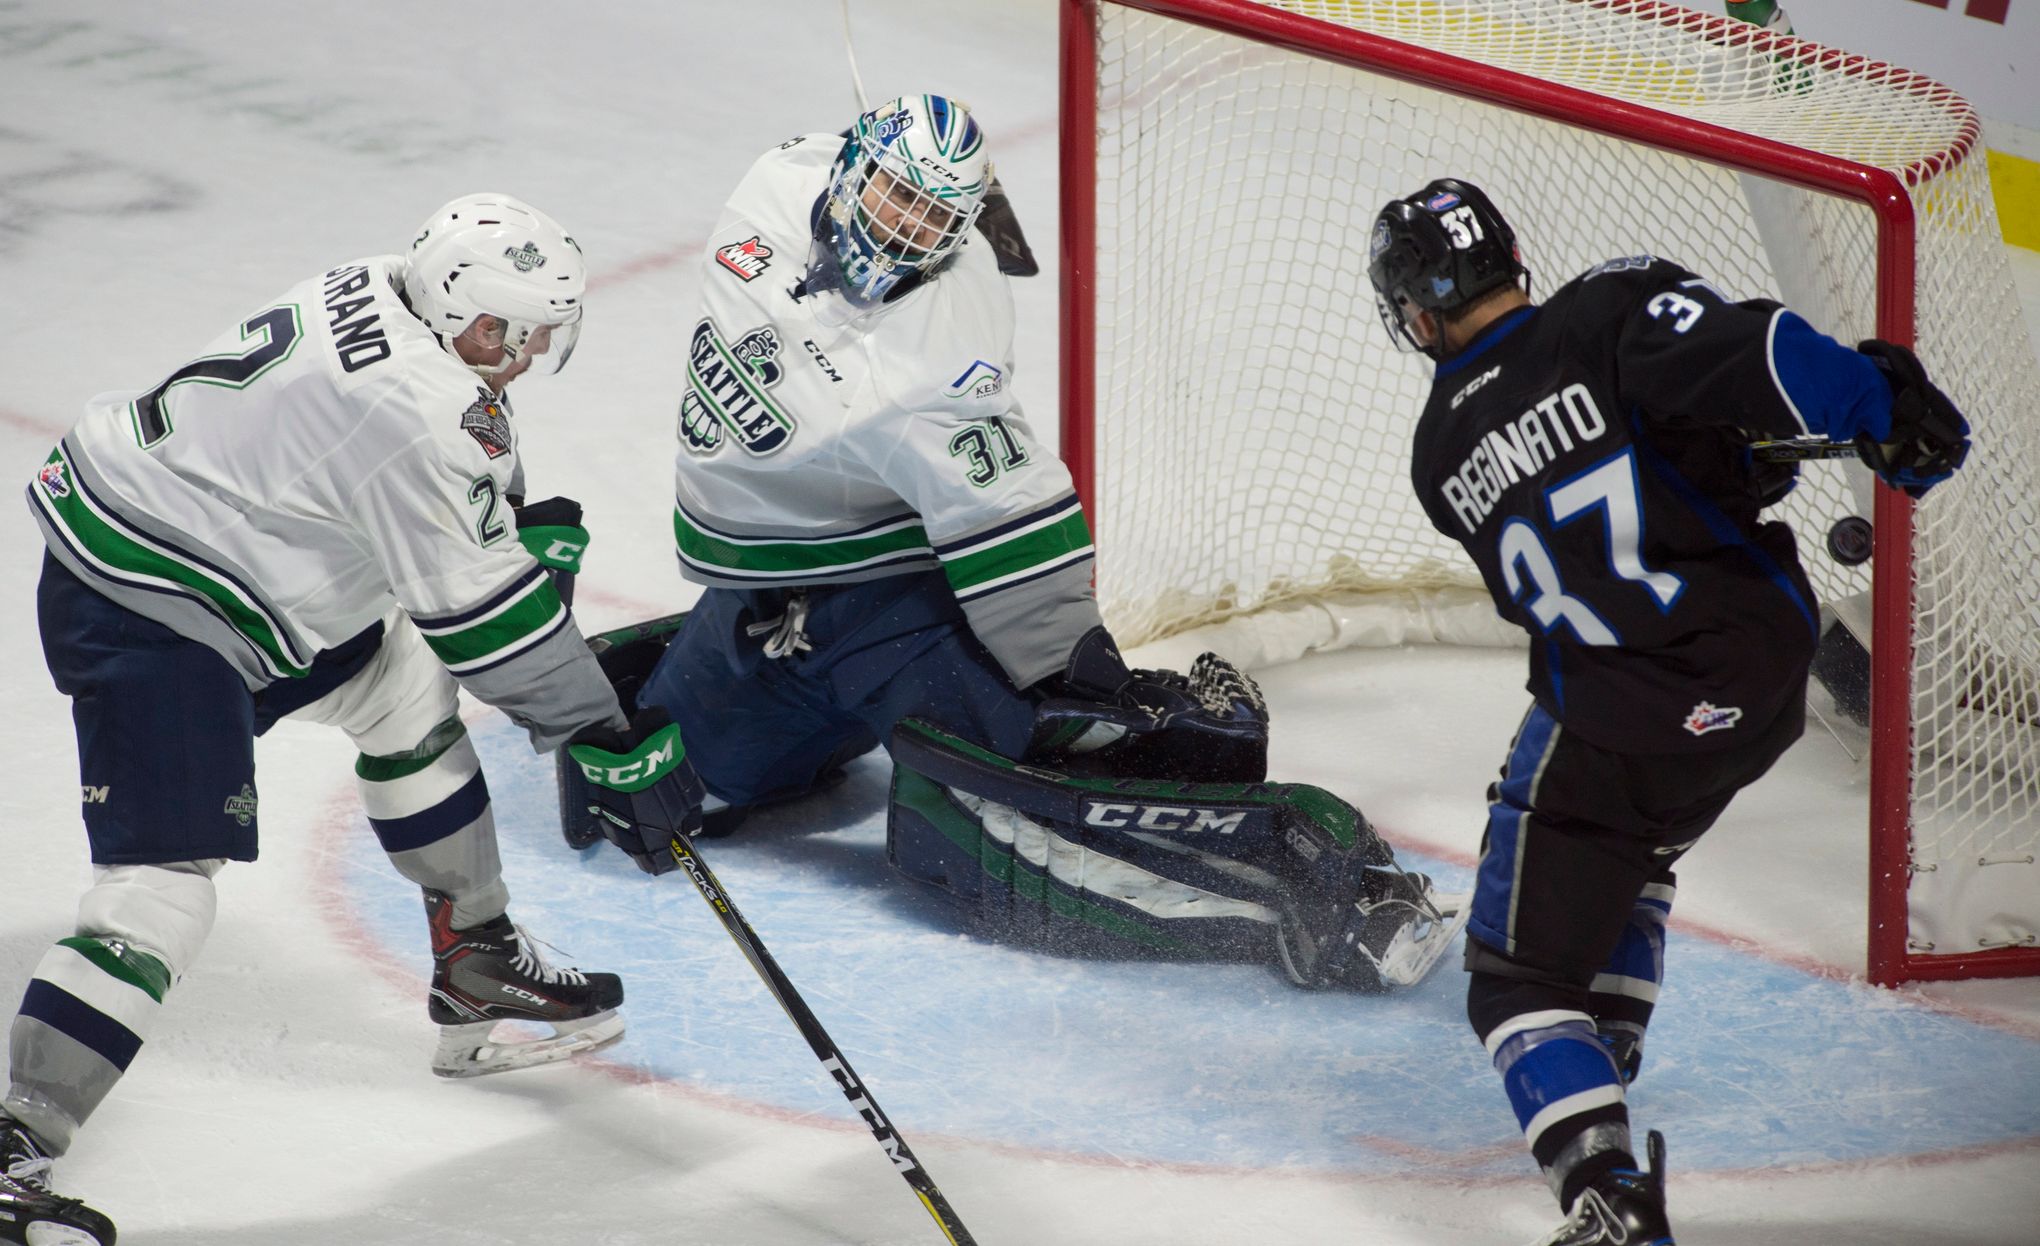 Thunderbirds have experience on their side entering Memorial Cup